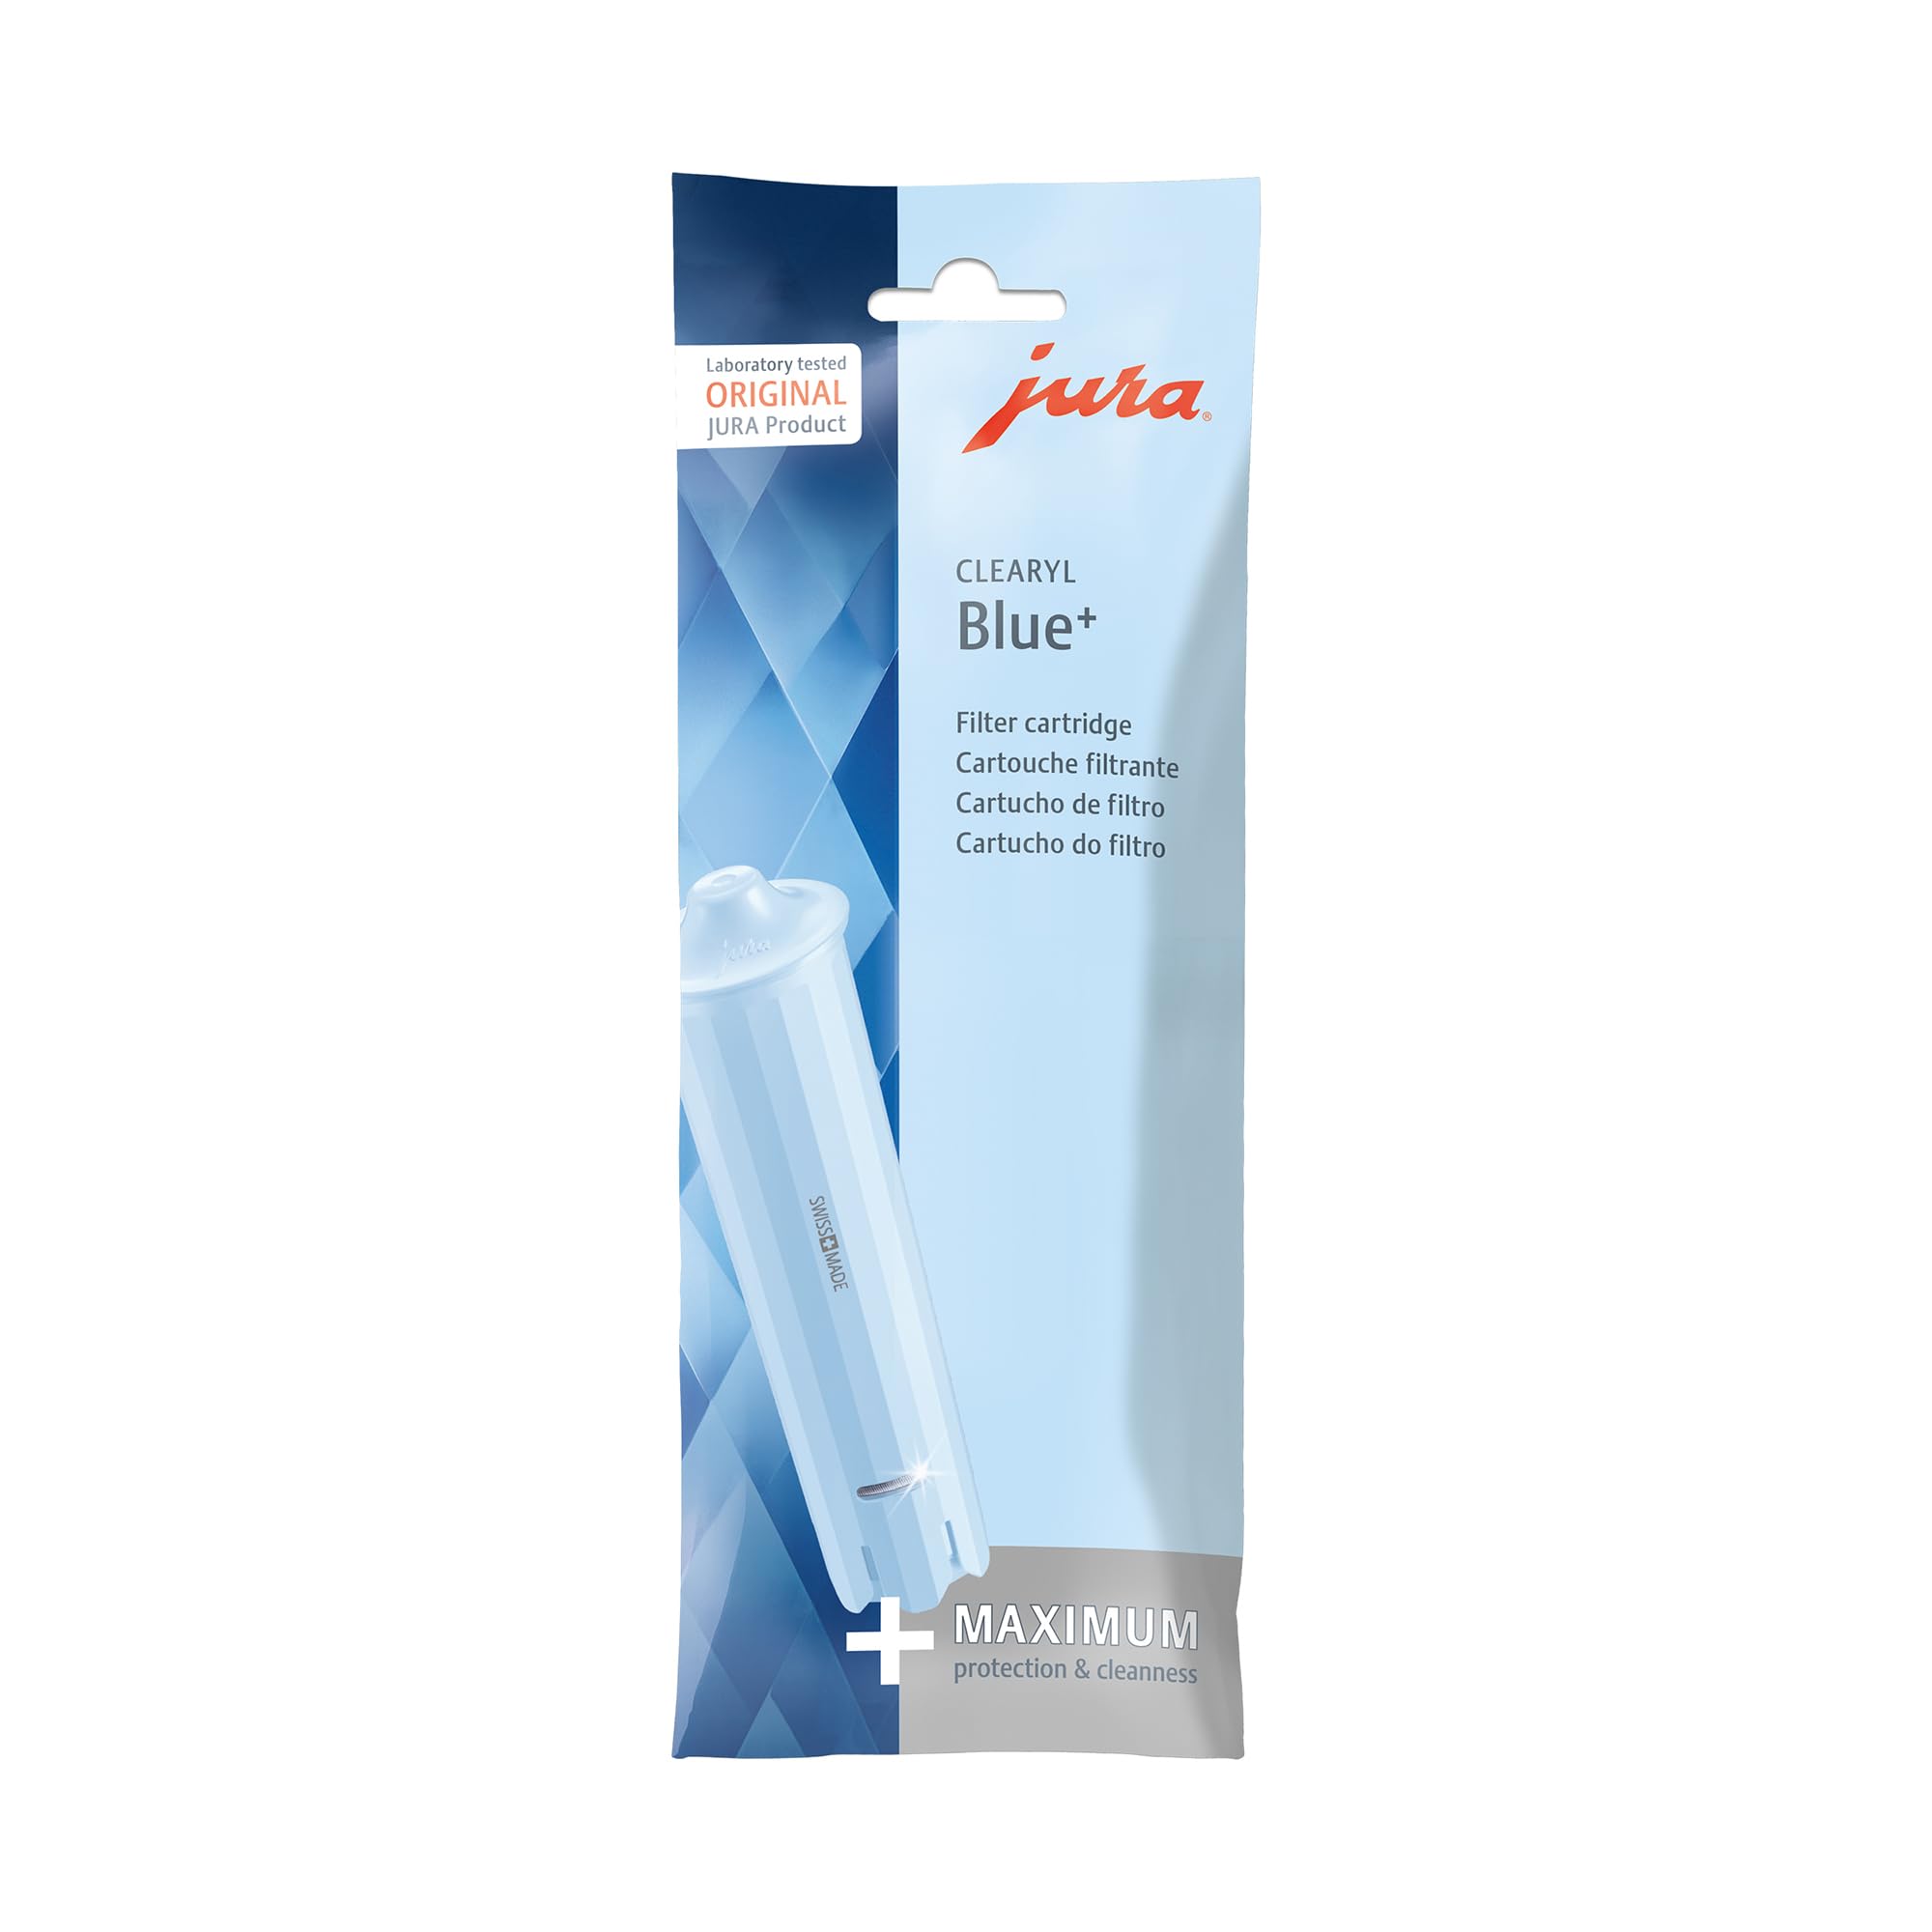 JURA 24229 CLEARYL Blue+ Water Filter